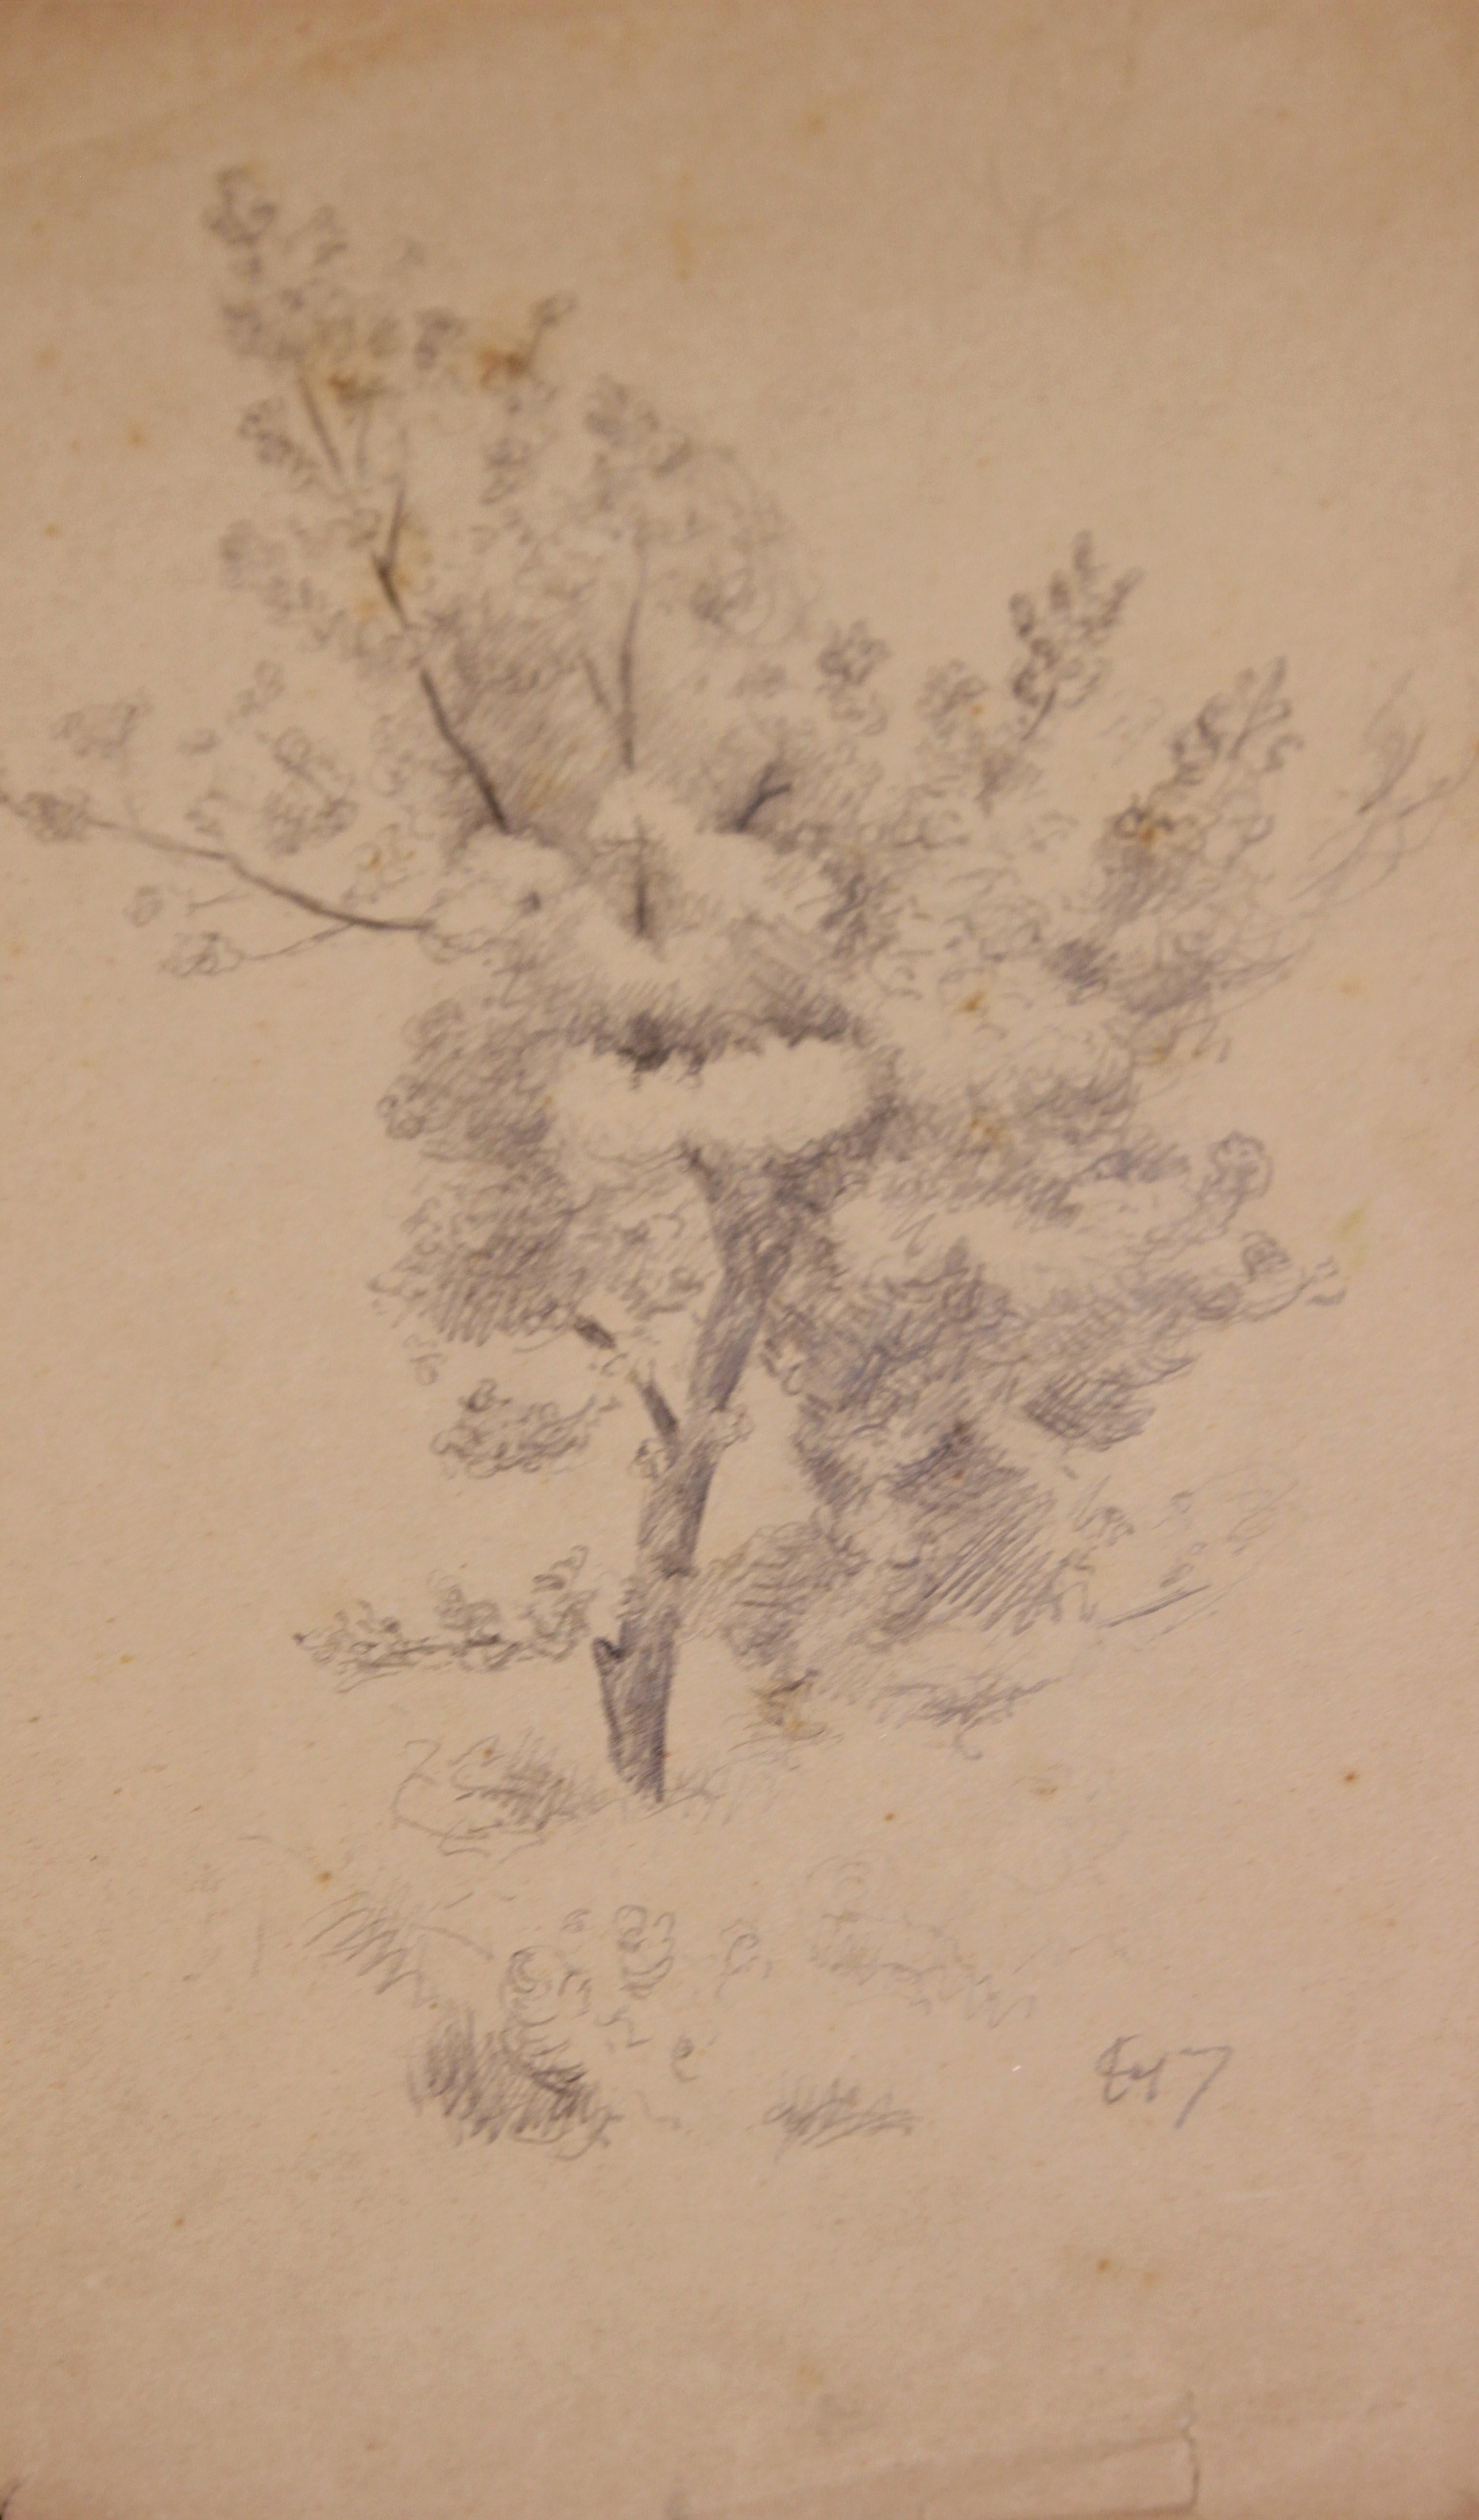 Naturalistic Pencil Study of a Tree - Art by Emile Lejeune